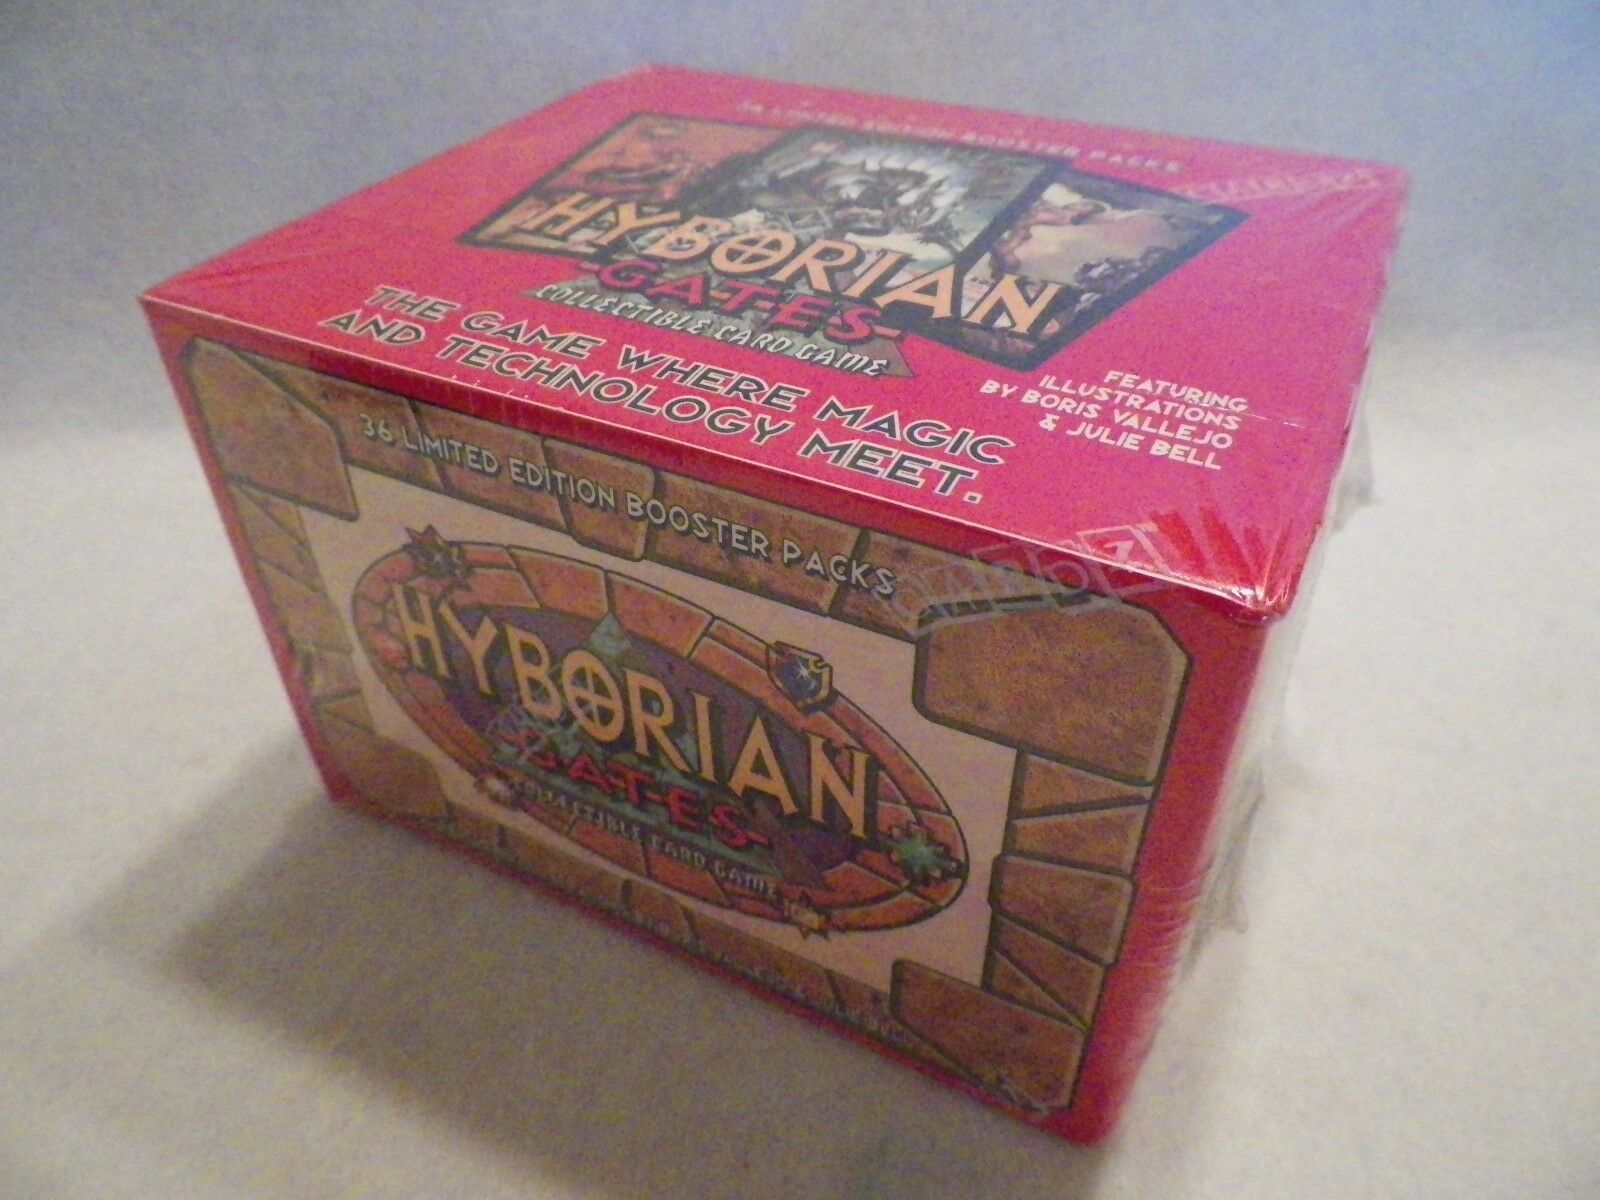 Hyborian Gates Collectible Card Game Booster Box (Limited Edition) | L.A. Mood Comics and Games